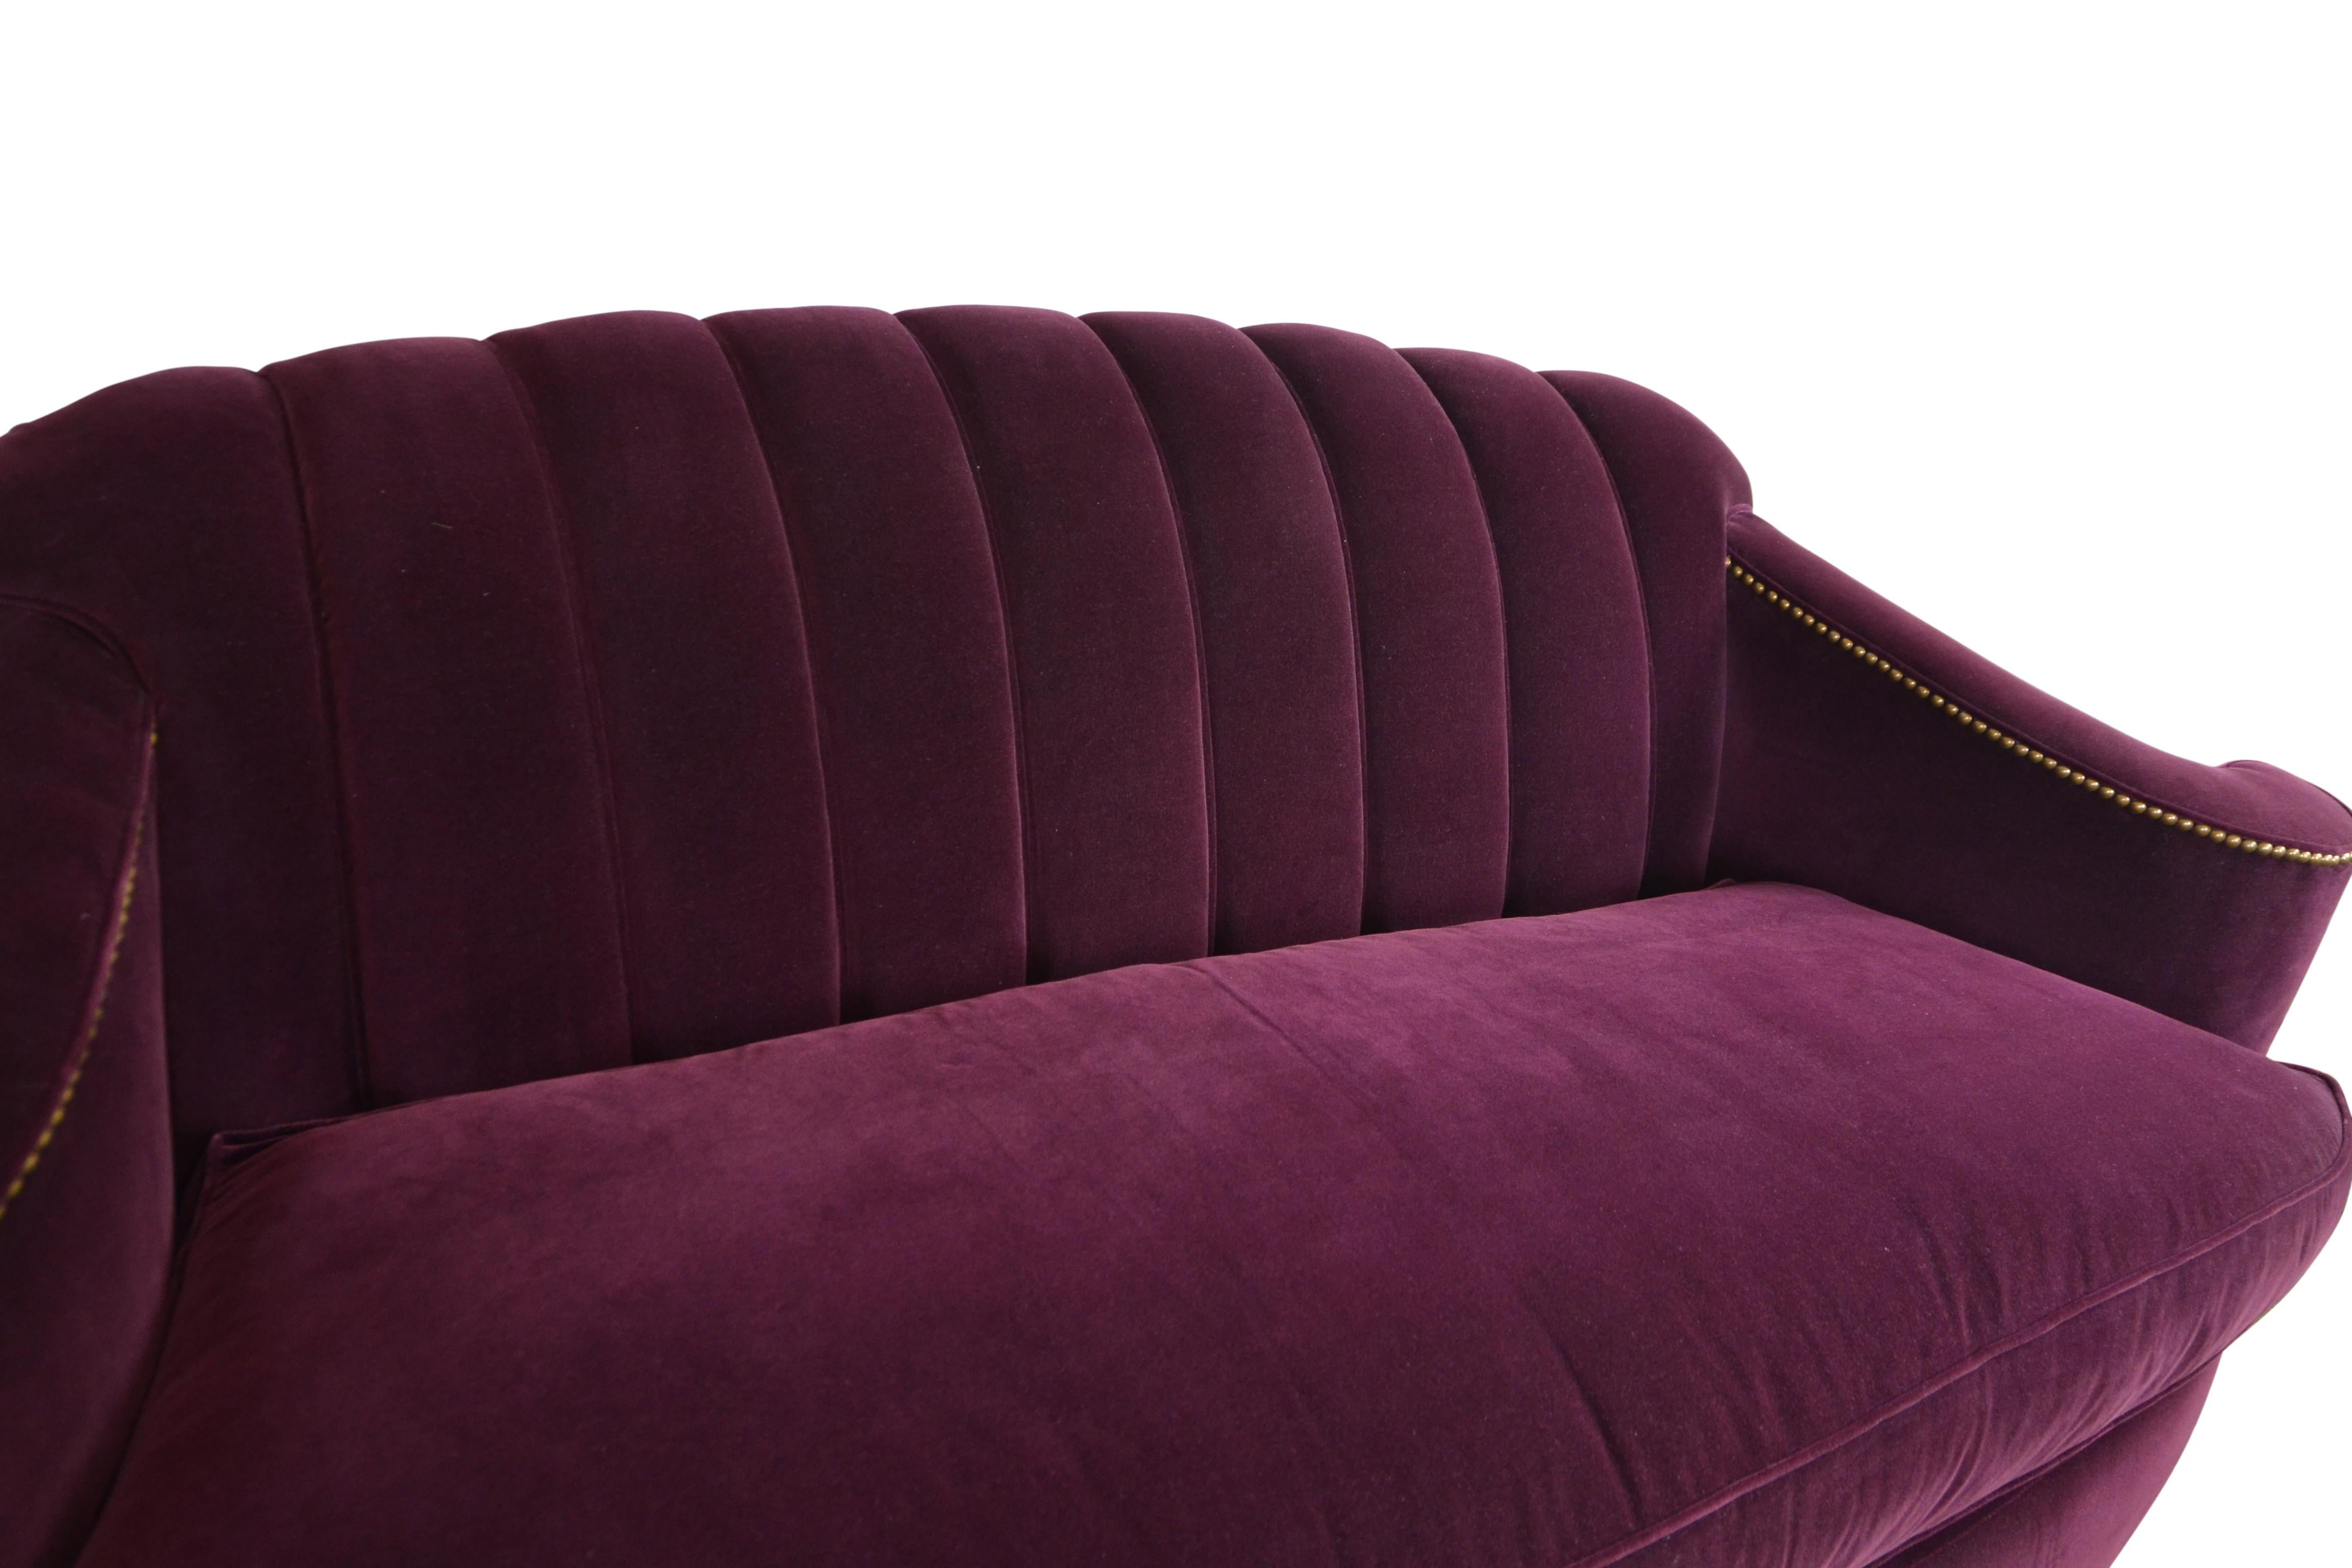 Art Deco style sofa covered in beautiful purple velvet fabric. Channel back beautifully curved arms and ball feet. Down cushion.